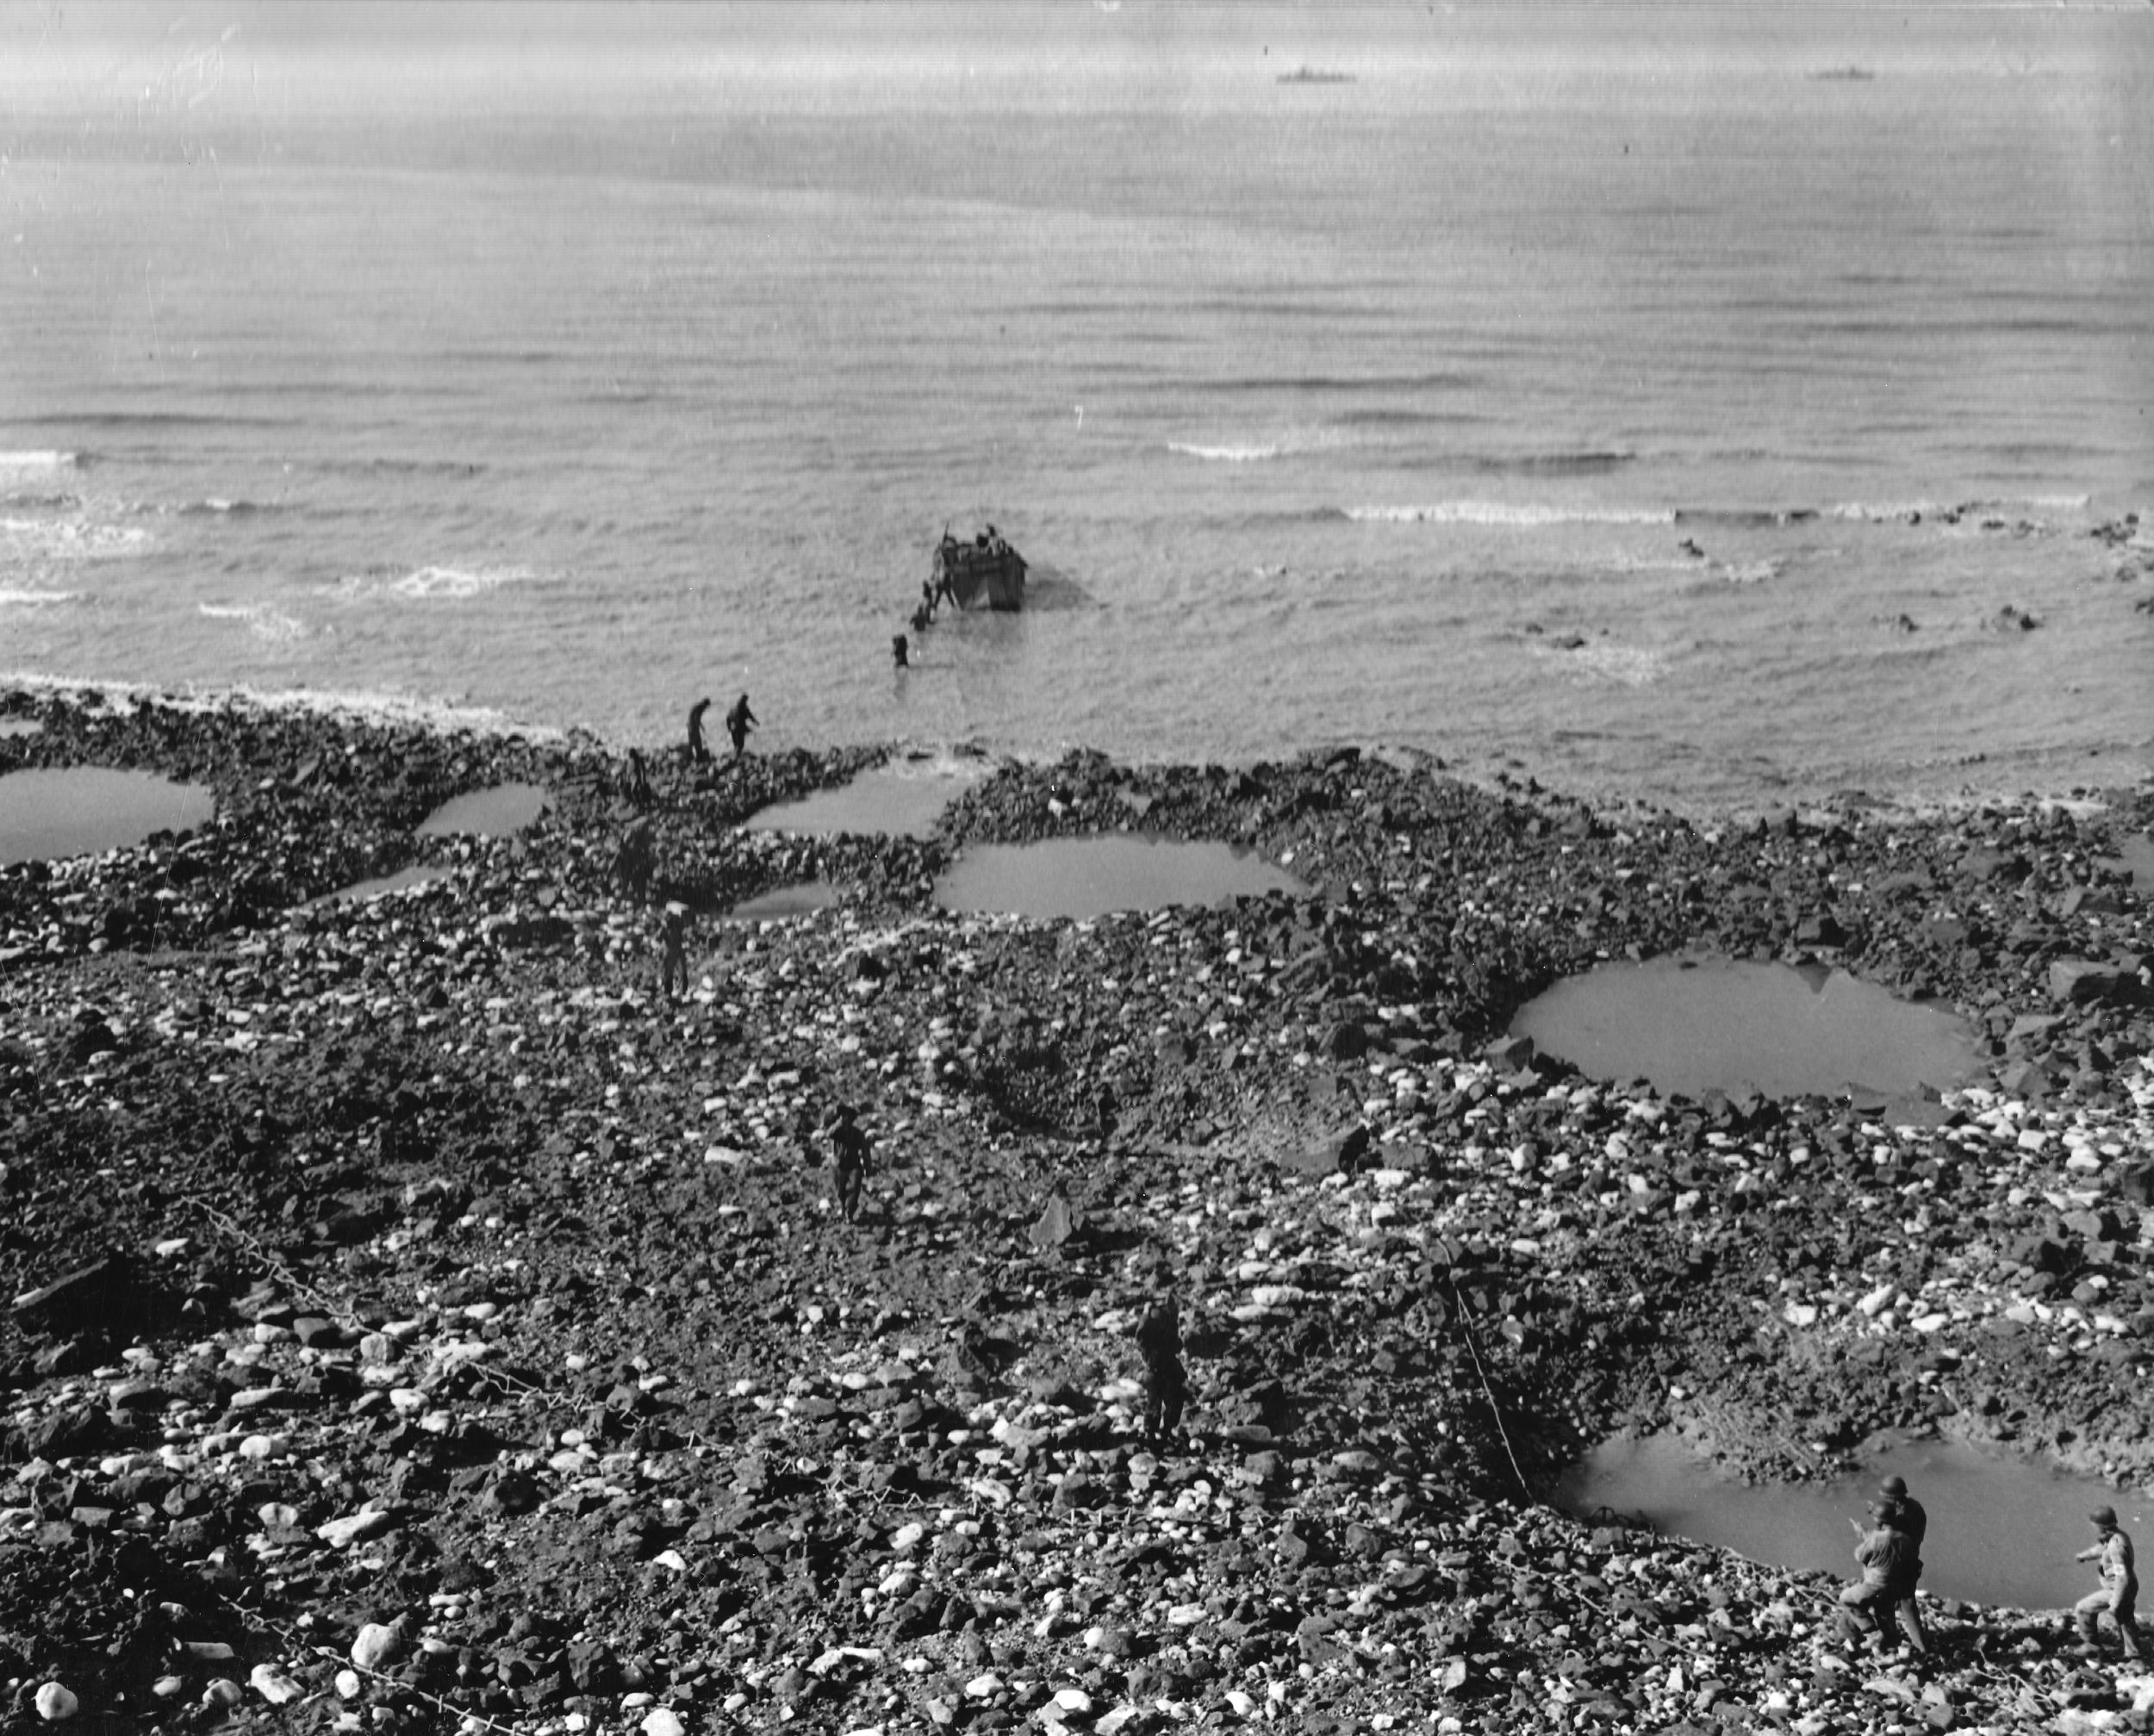 Large craters caused by Allied shells pit the rocky beach below Pointe du Hoc’s cliffs. A landing craft disgorging troops and supplies is visible.